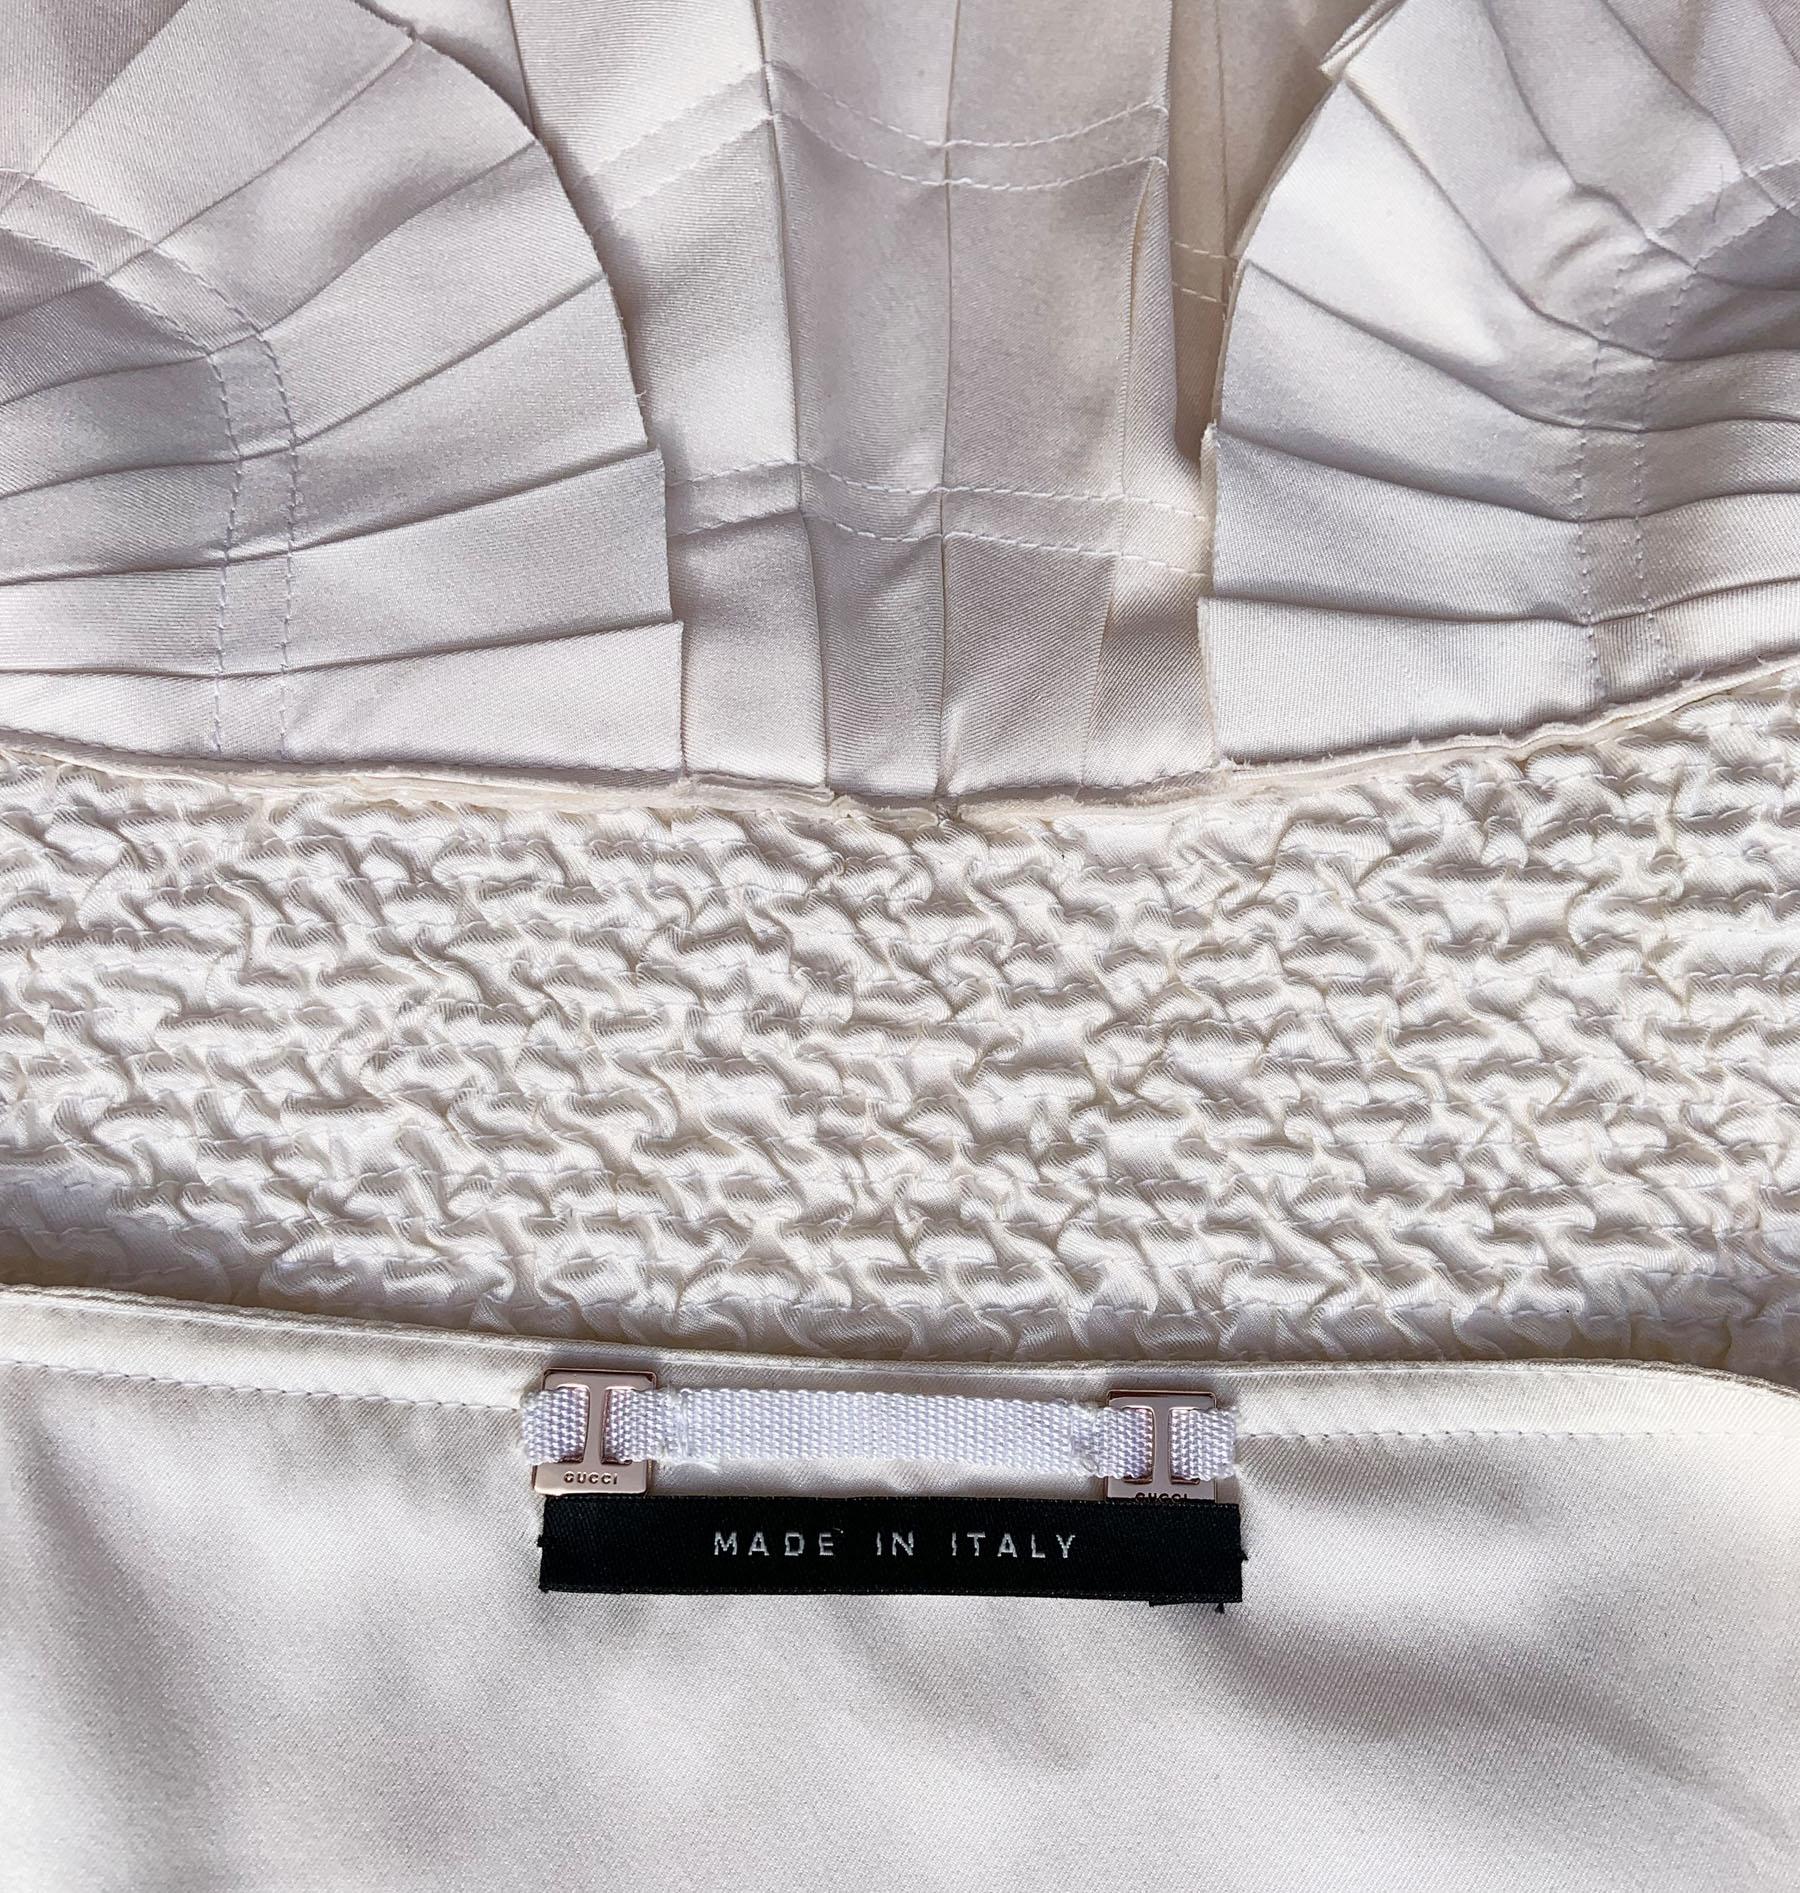 Tom Ford for Gucci S/S 2004 Silk Off-White Color Fan Pleated Jacket It 40 - US 4 For Sale 11